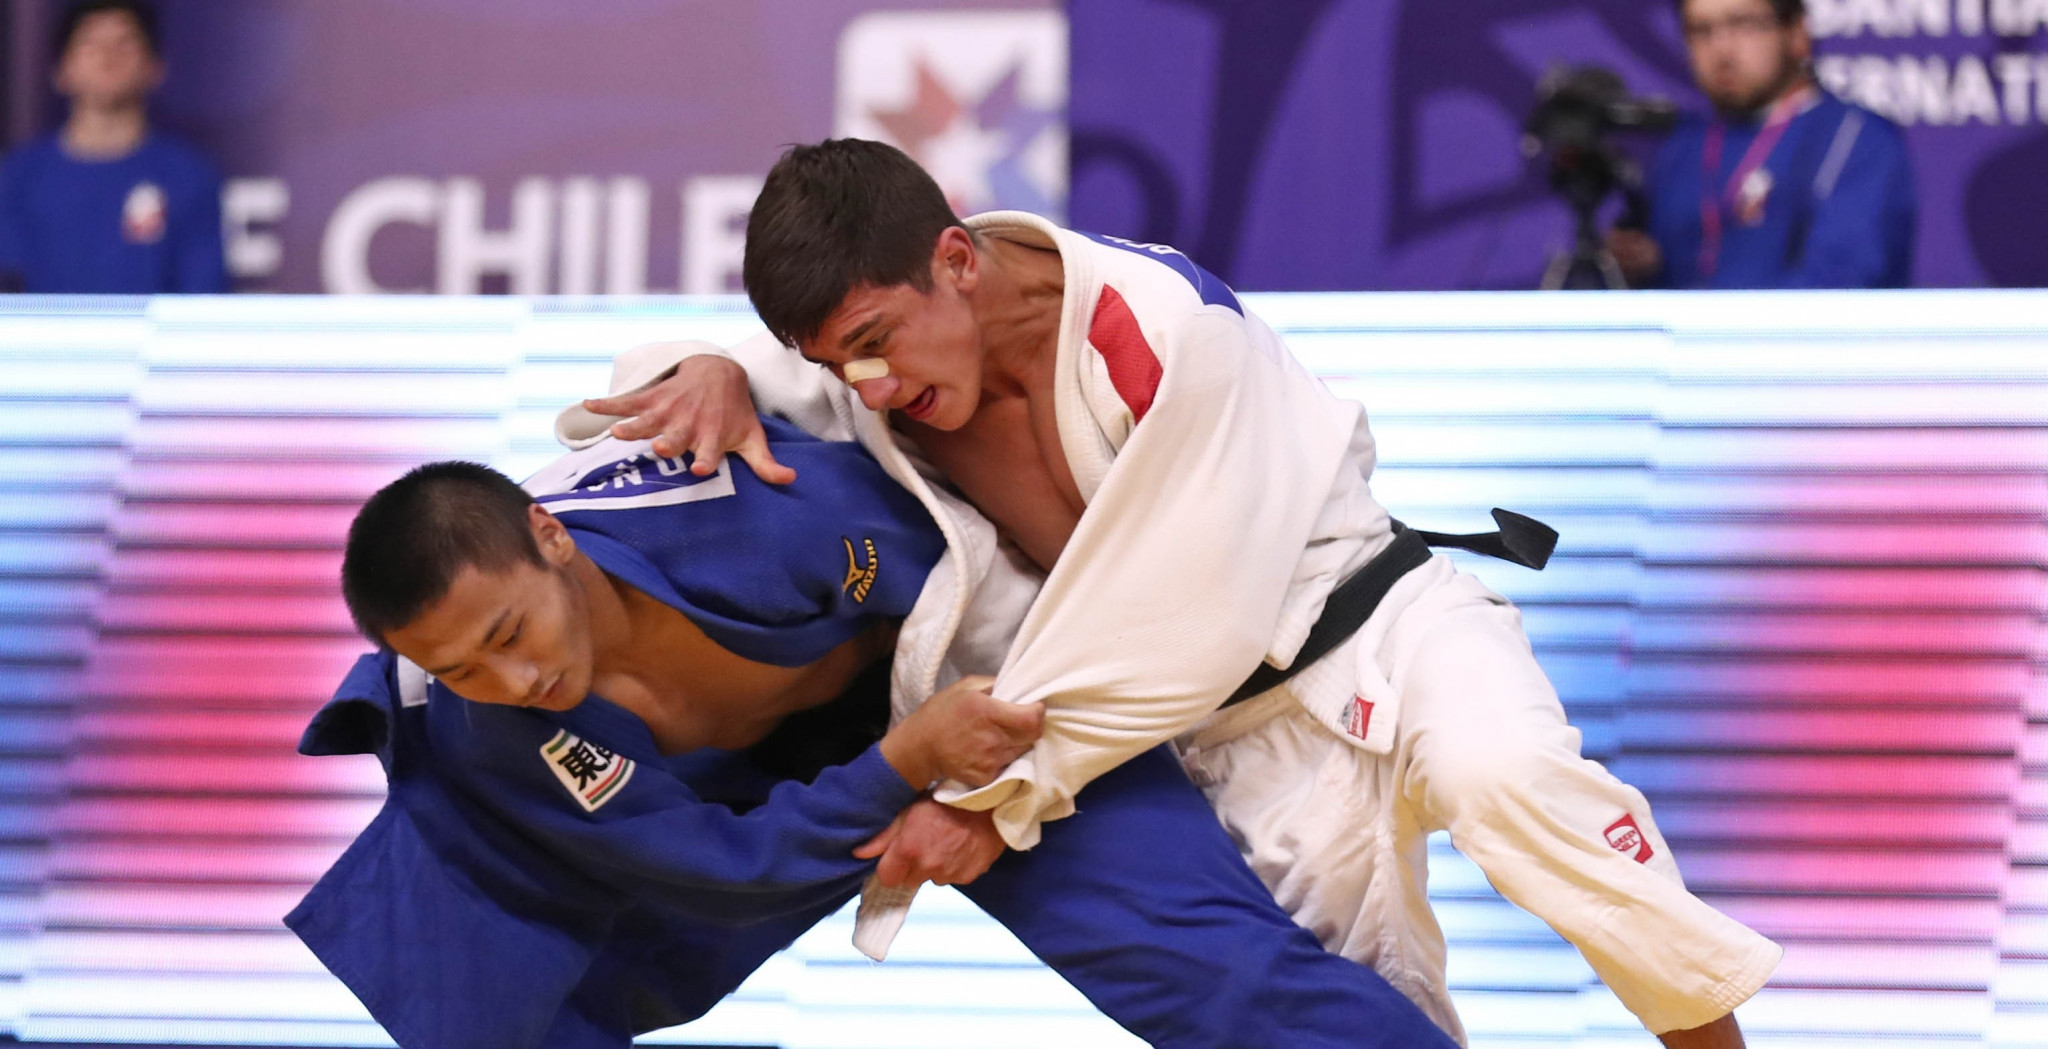 Lasha Bekauri successfully defended his title in the men's under-90kg category ©IJF/Mayorova Marina